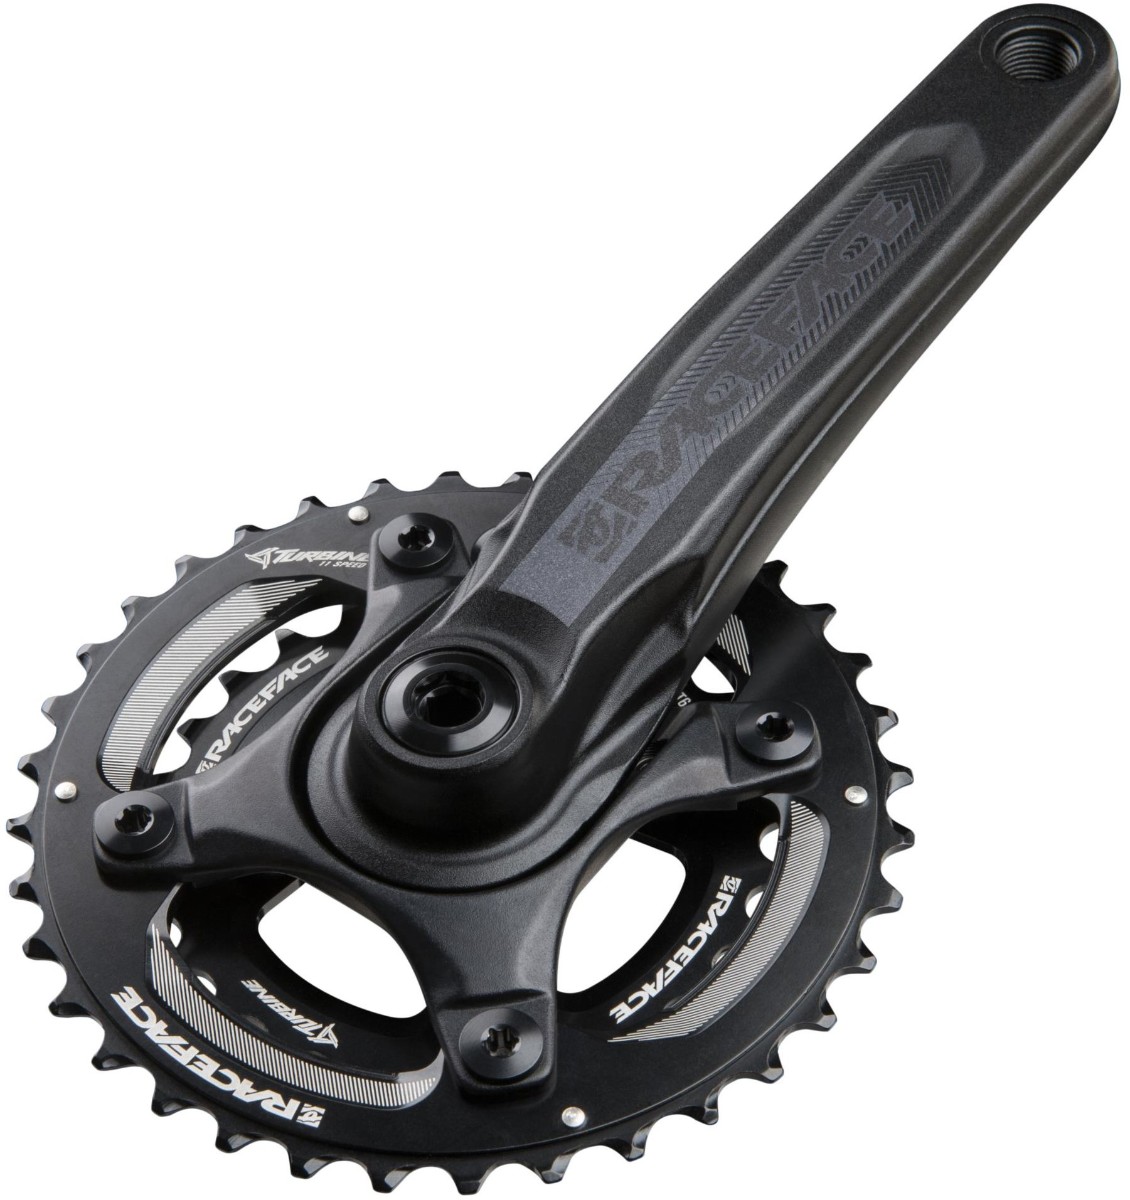 Race Face AEffect 2x10 Double Ring Cranks